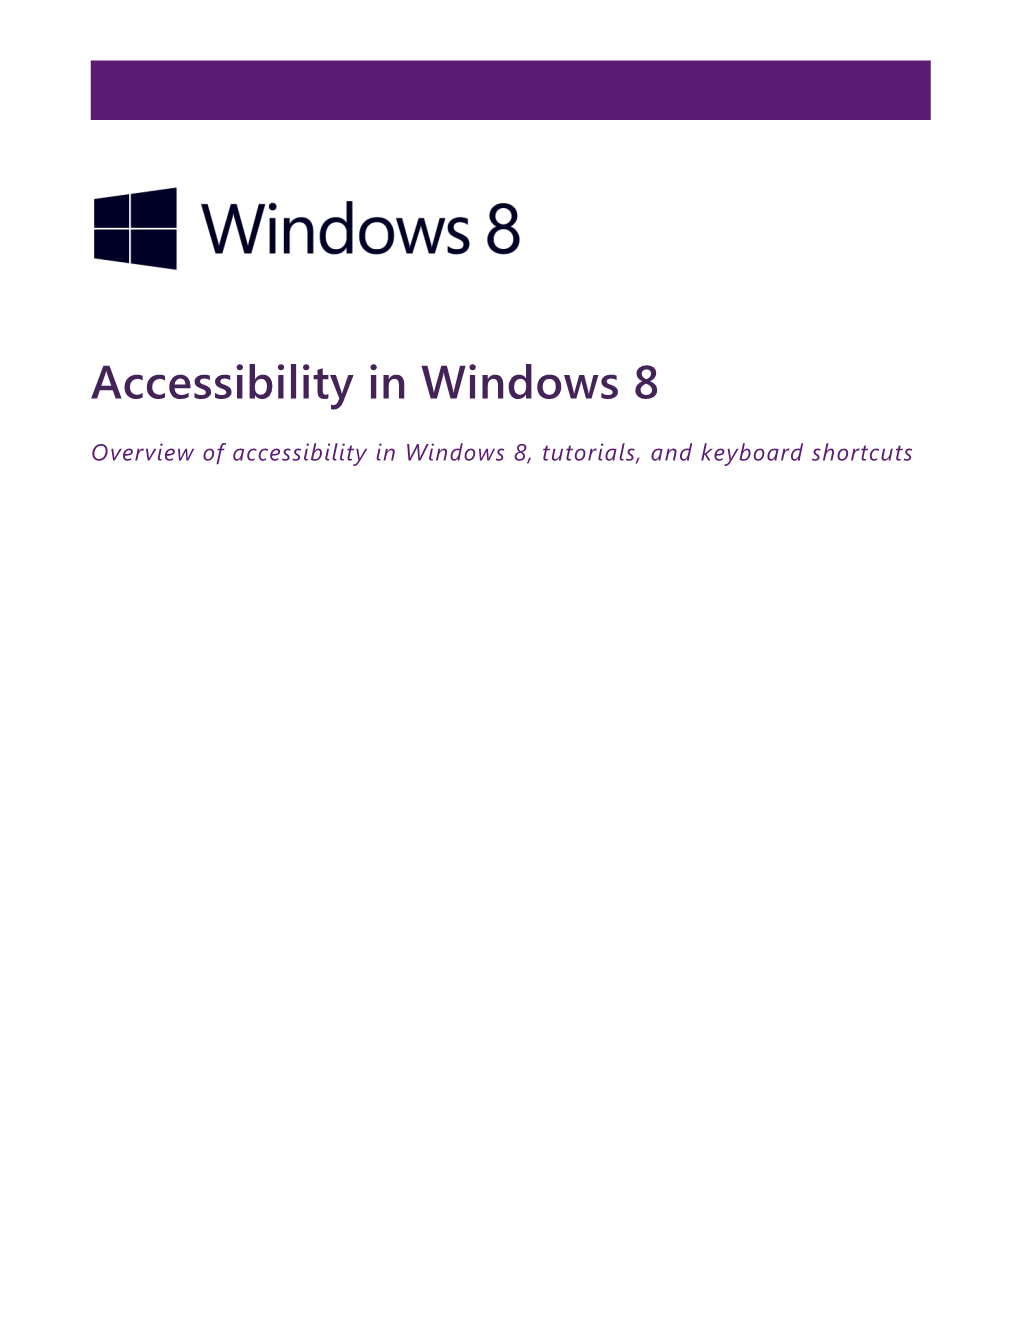 Overview of Accessibility in Windows 8, Tutorials, and Keyboard Shortcuts